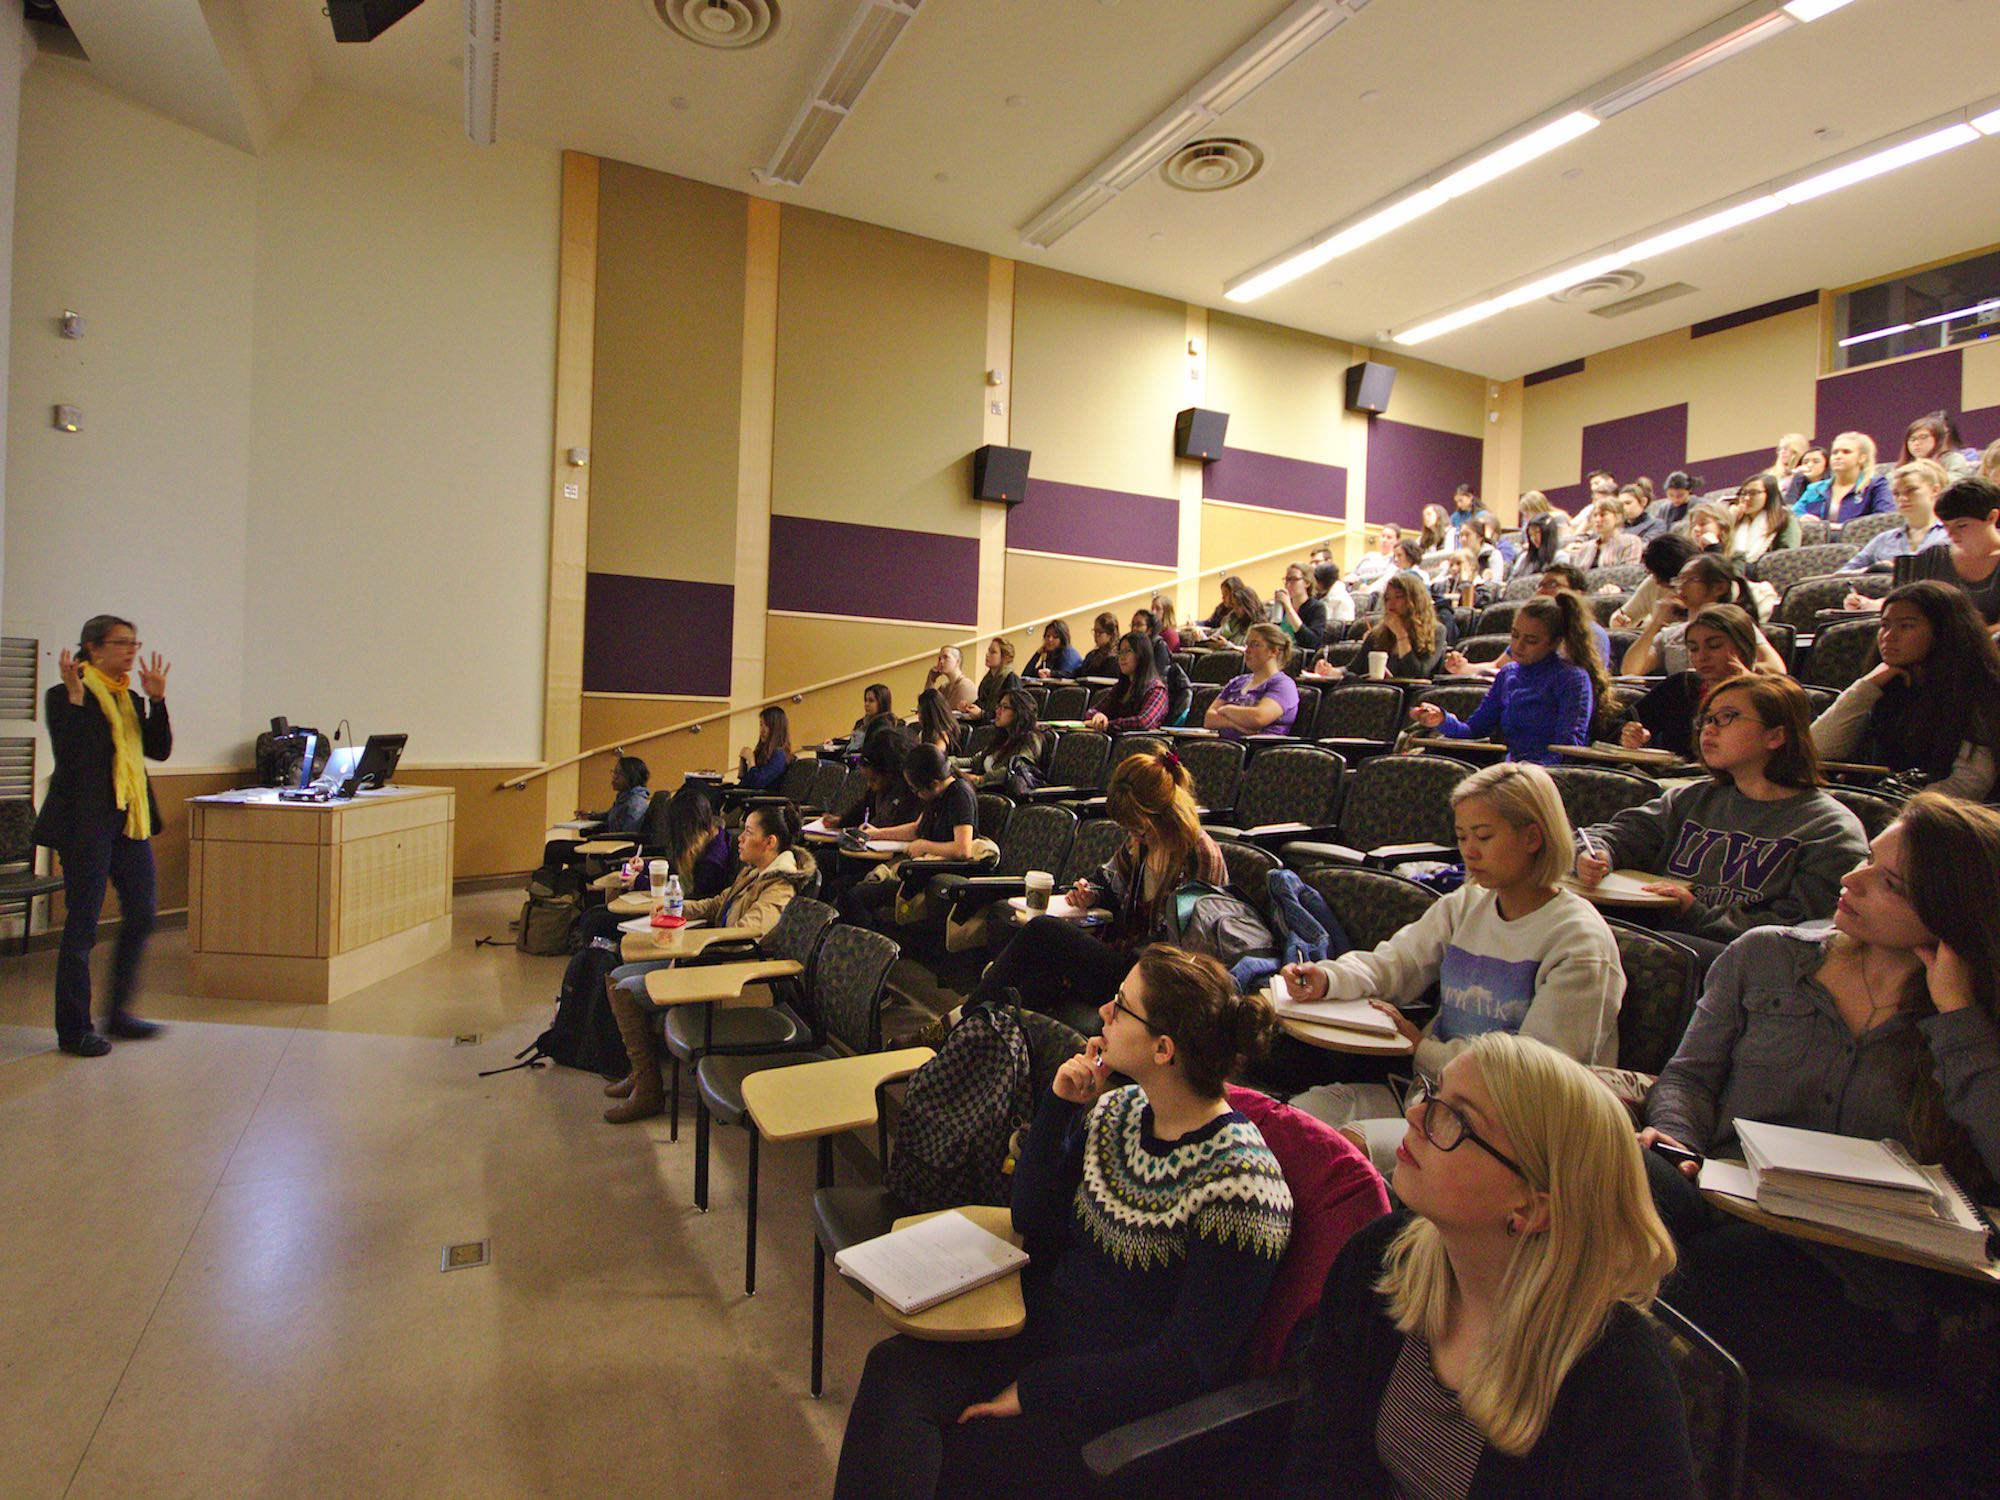 Students observing a lecture in a theater style classroom